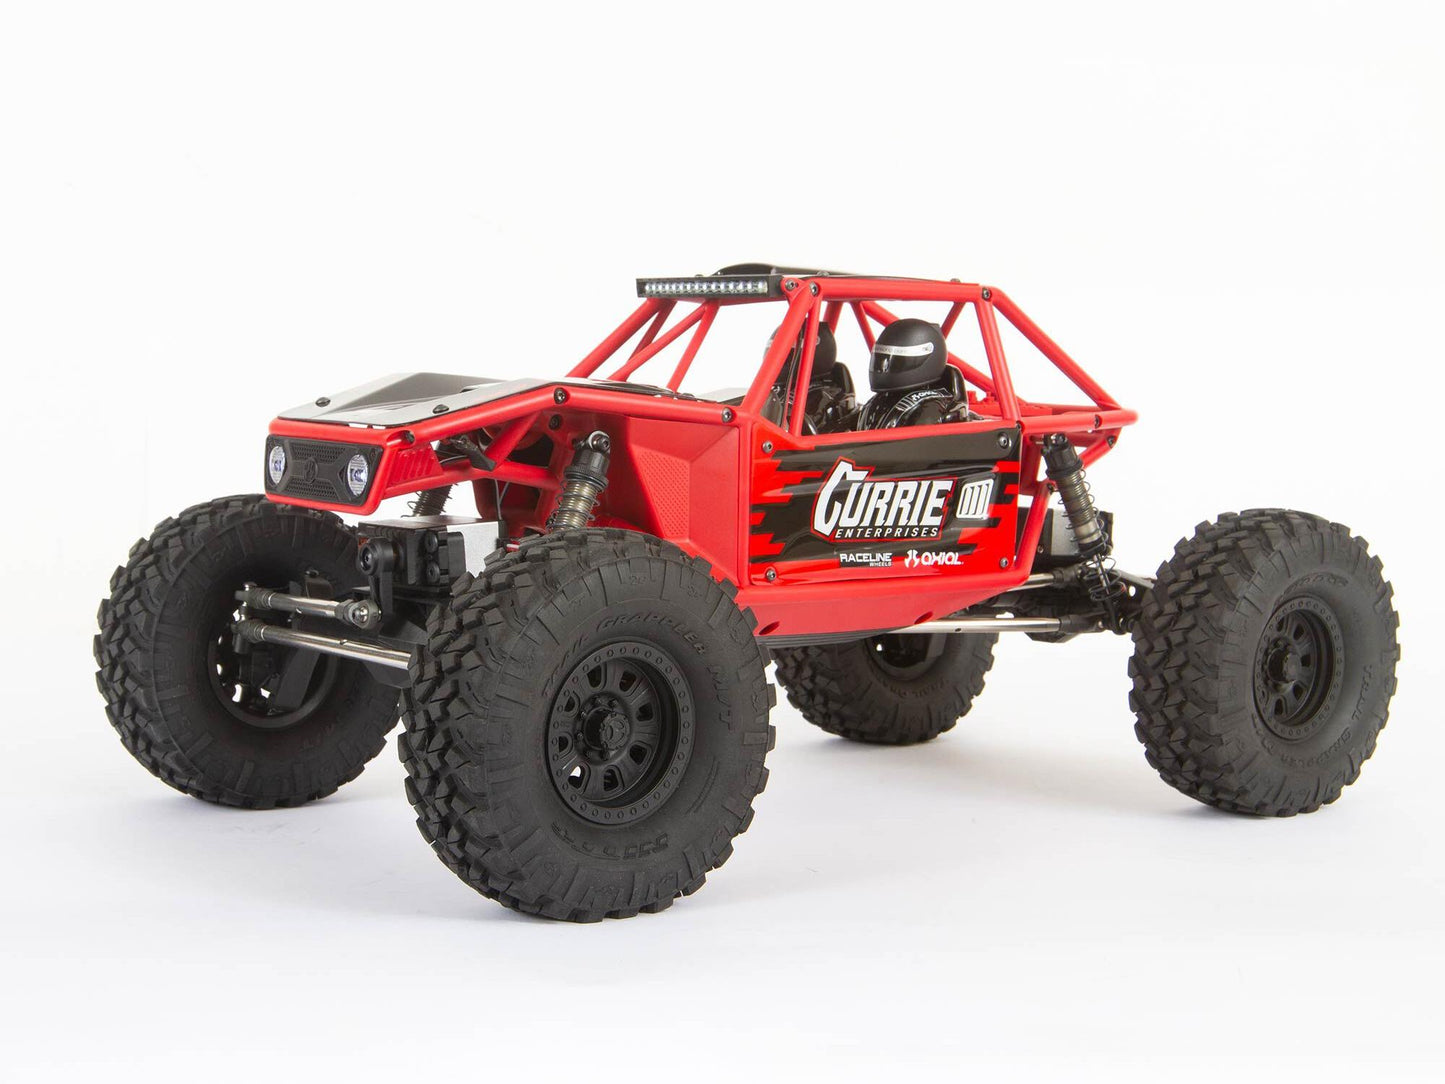 AXIAL 1/10 Capra 1.9 4WS Unlimited Trail Buggy RTR, Black  AXI03022BT2 Red AXI03022BT1  shadow stock